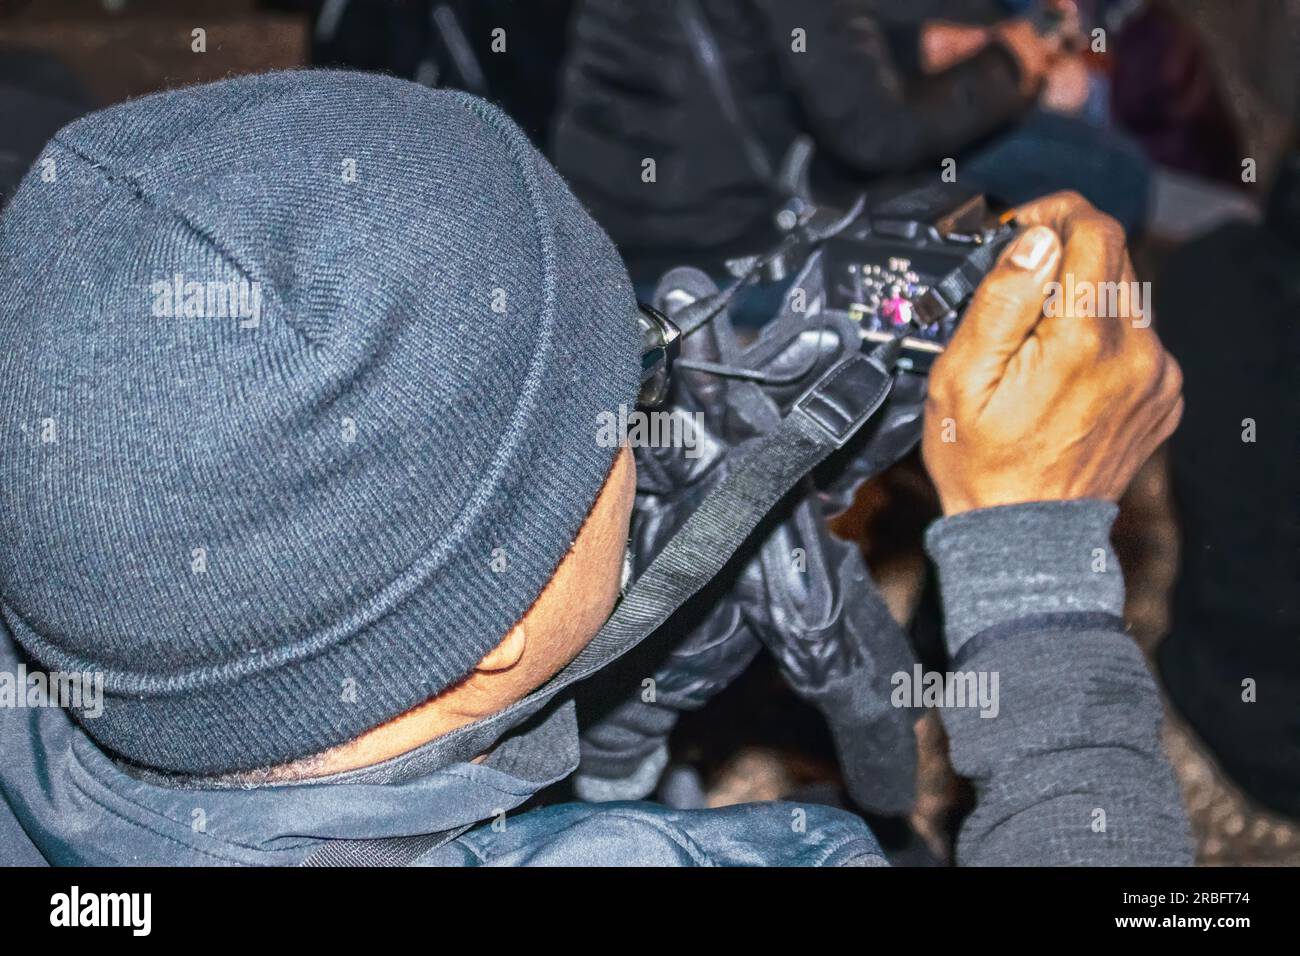 Black man with knitted cap videotaping a performance at night - shot from over his shoulder featuring camera Stock Photo